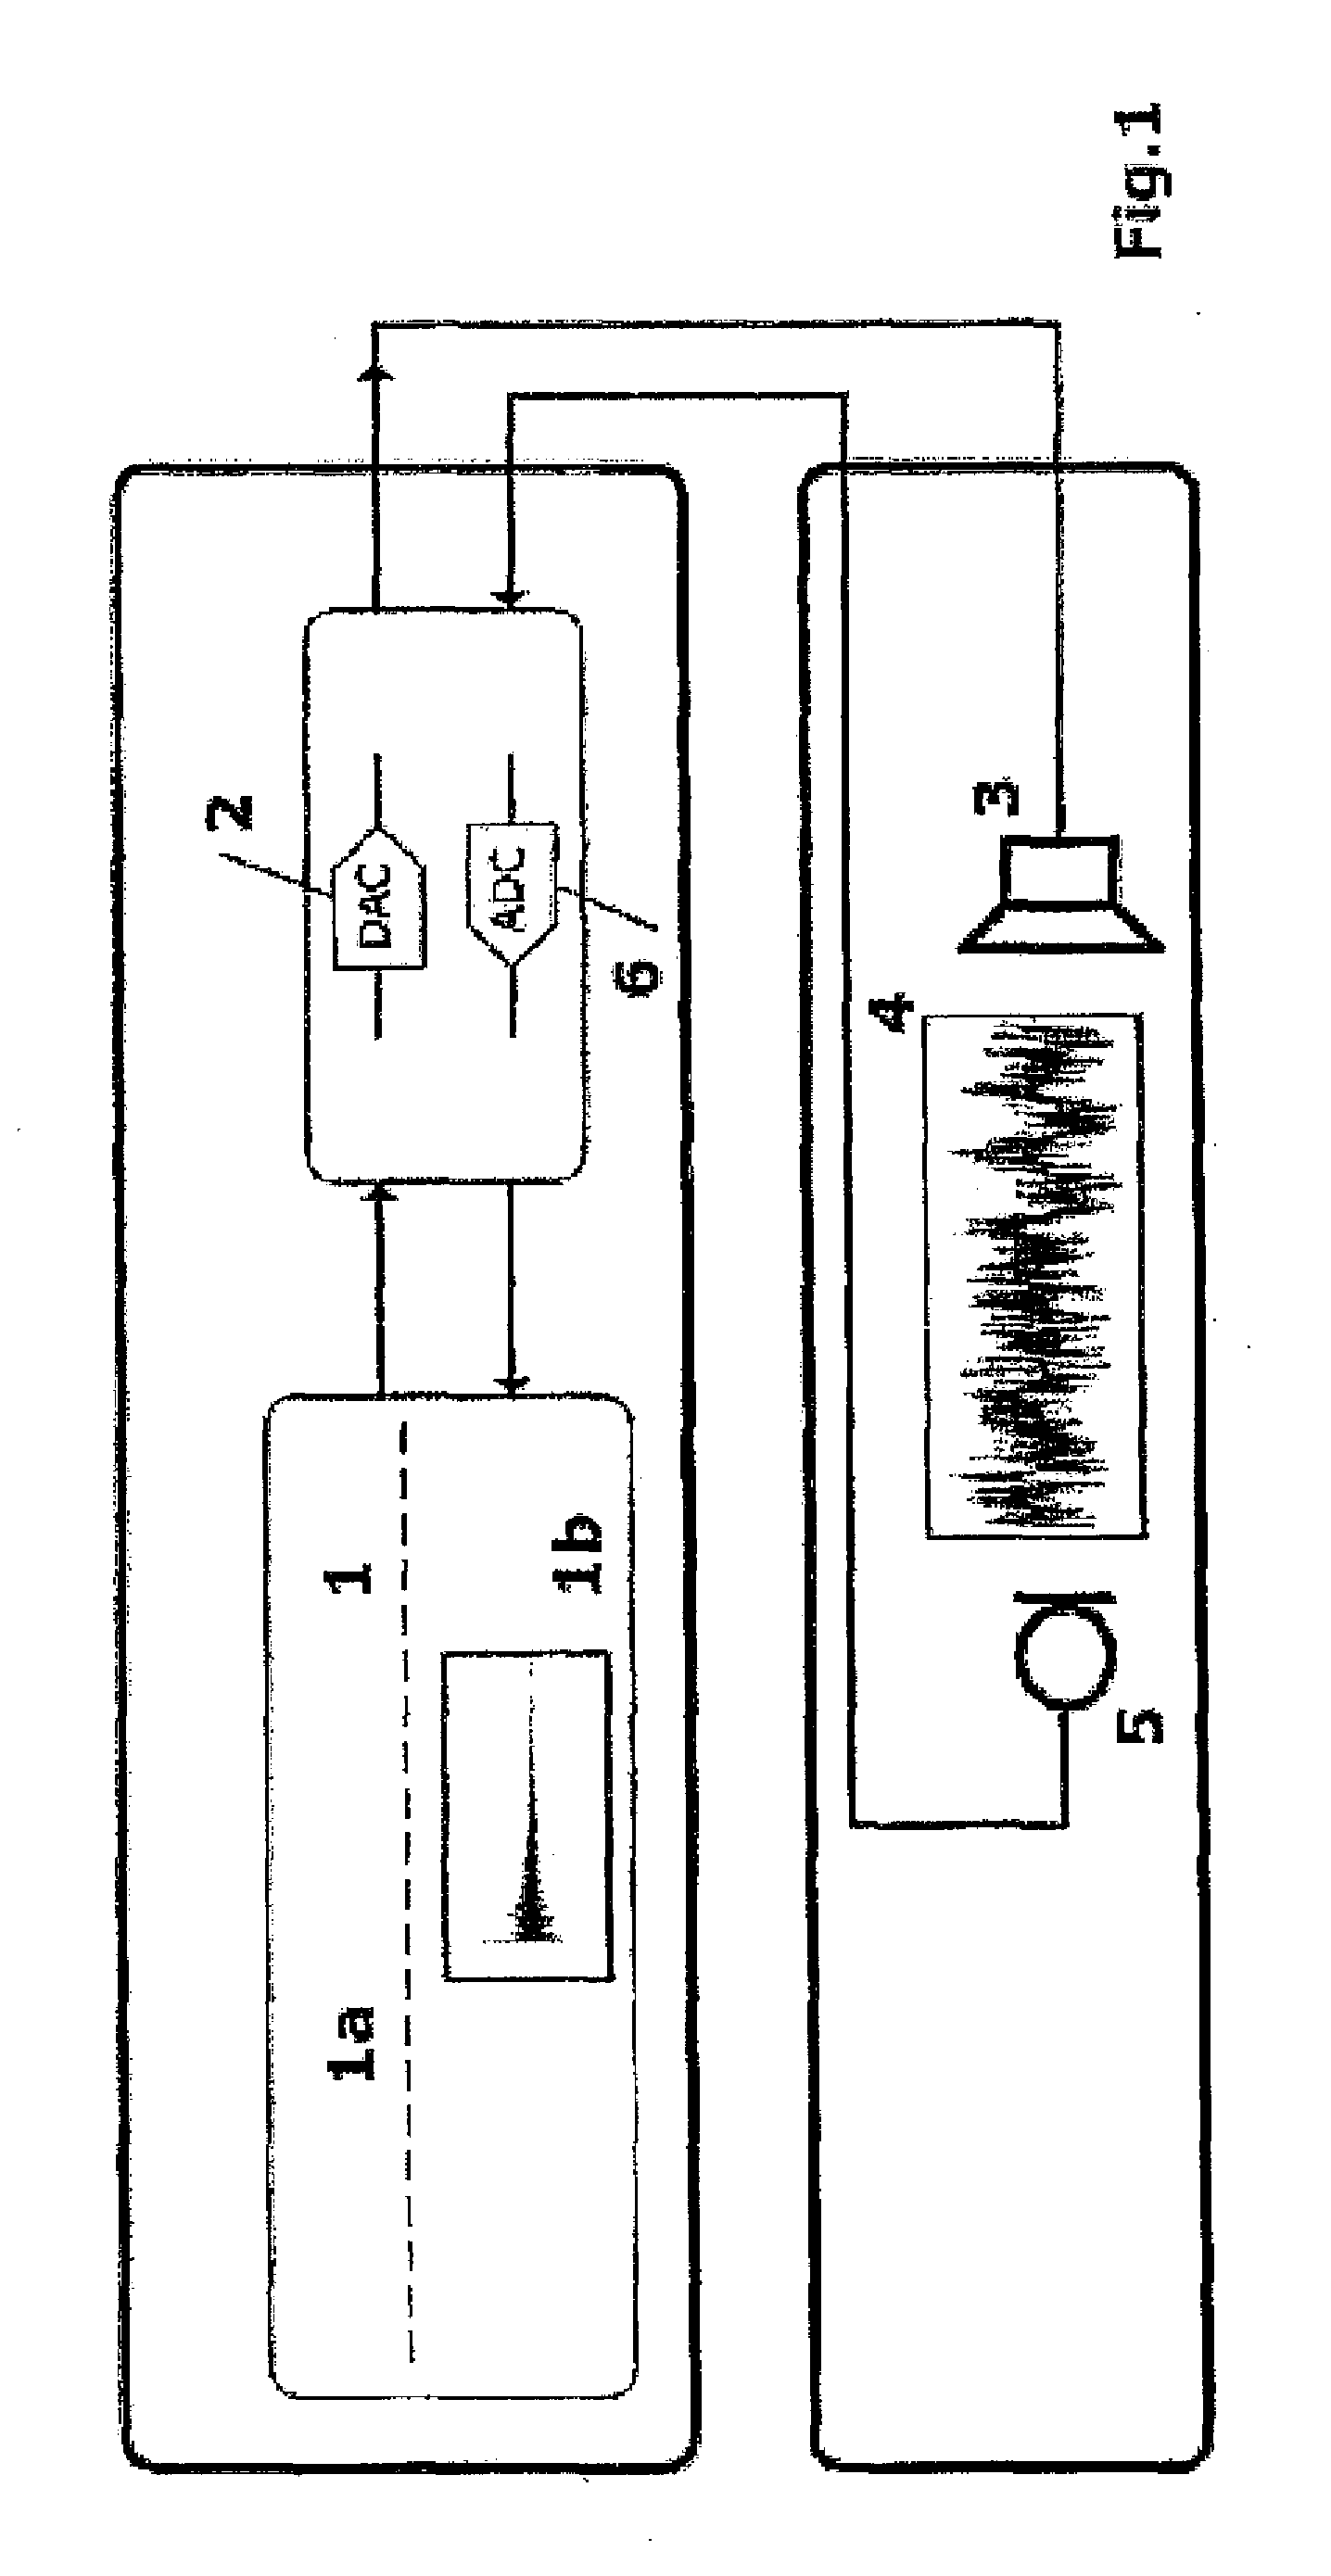 Method and Device for Determining a Room Acoustic Impulse Response in the Time Domain